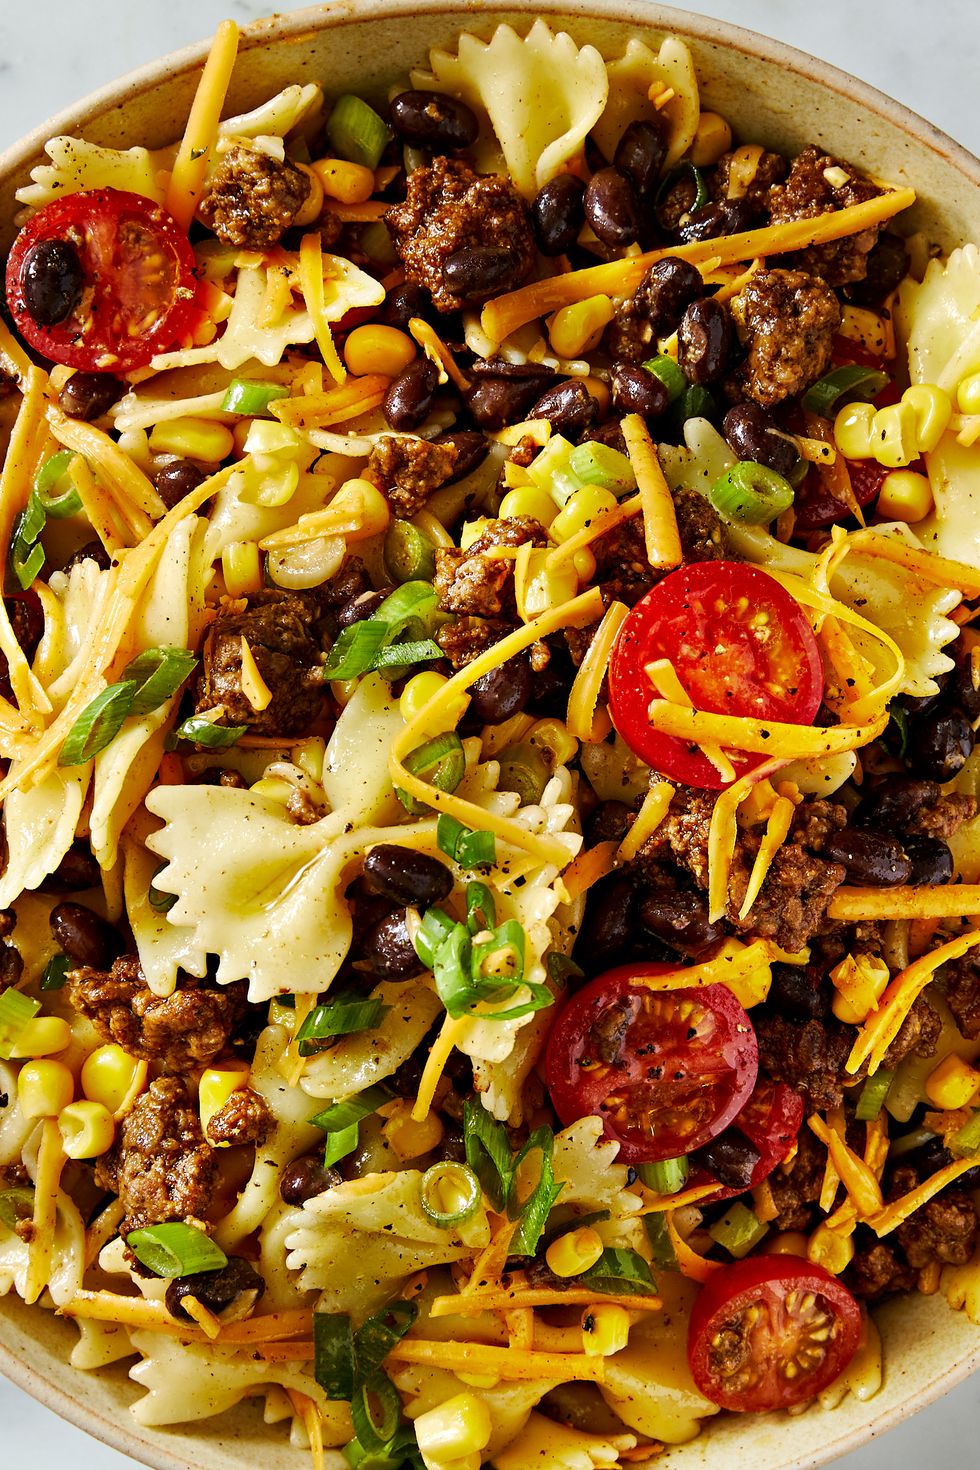 cowboy pasta salad with halved cherry tomatoes, ground beef, black beans, sliced scallions, and shredded cheddar